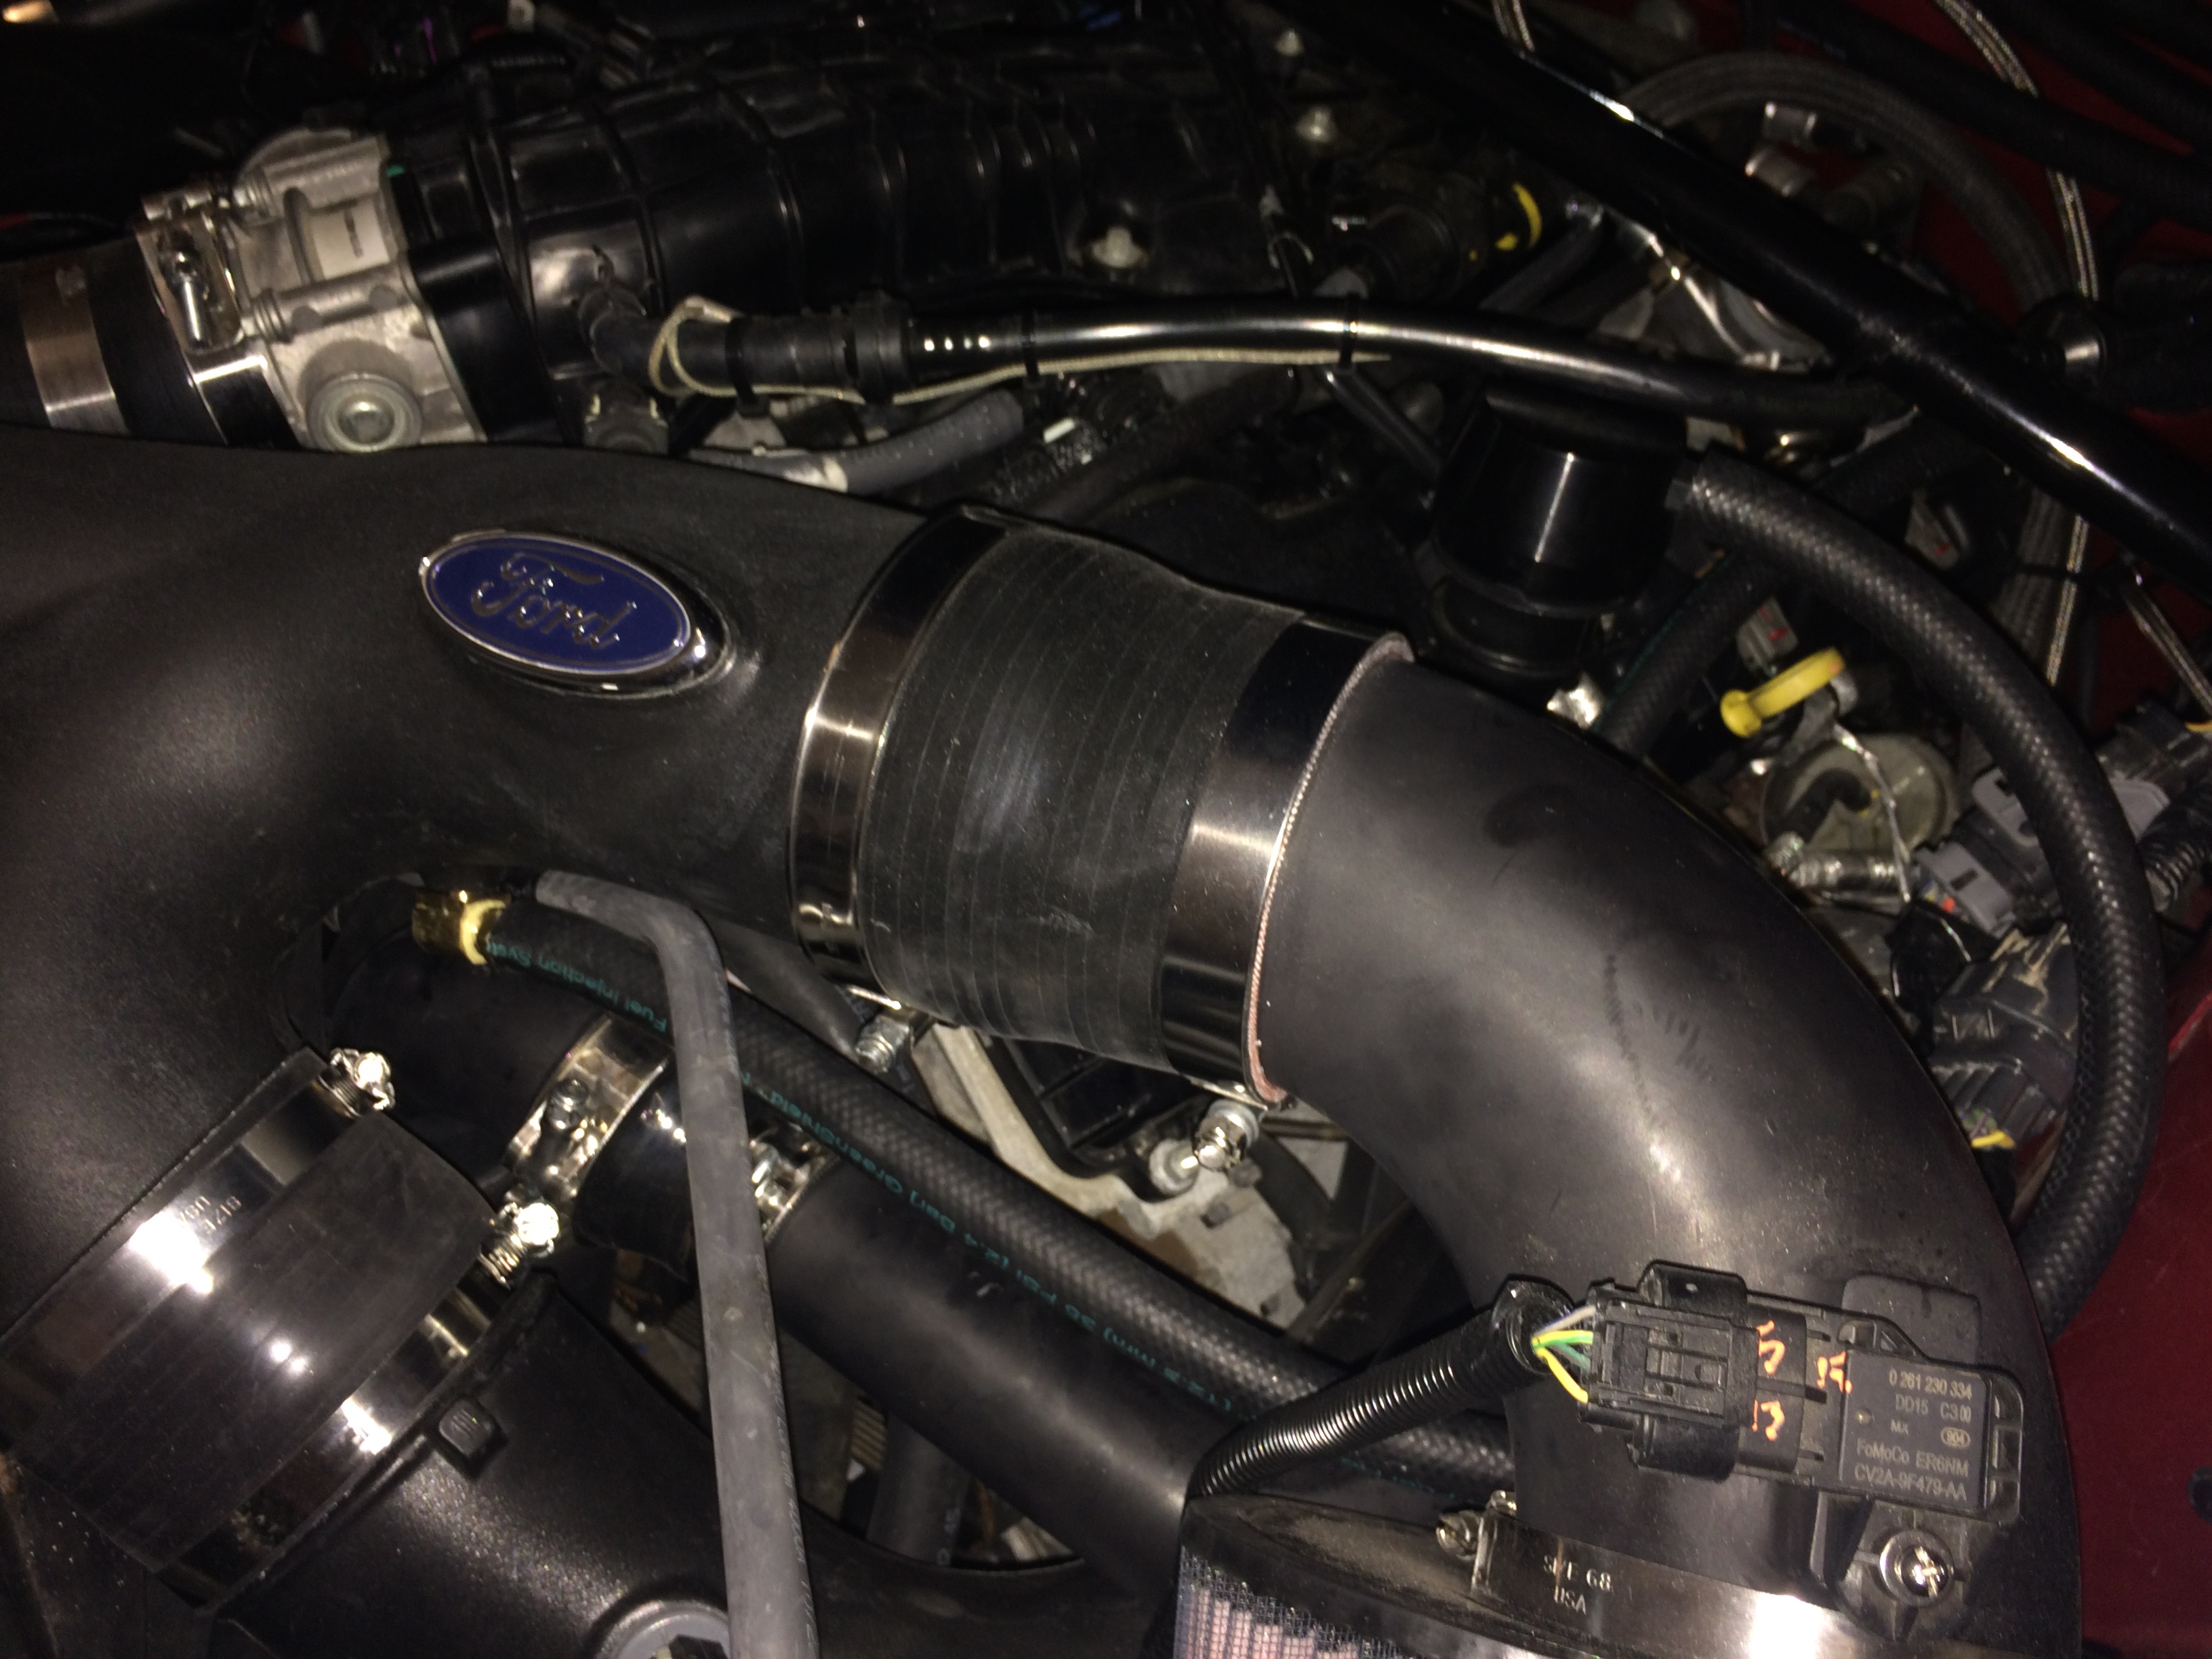 Mustang 3.5L Ecoboost engine swap - Page 52 - The Mustang Source - Ford